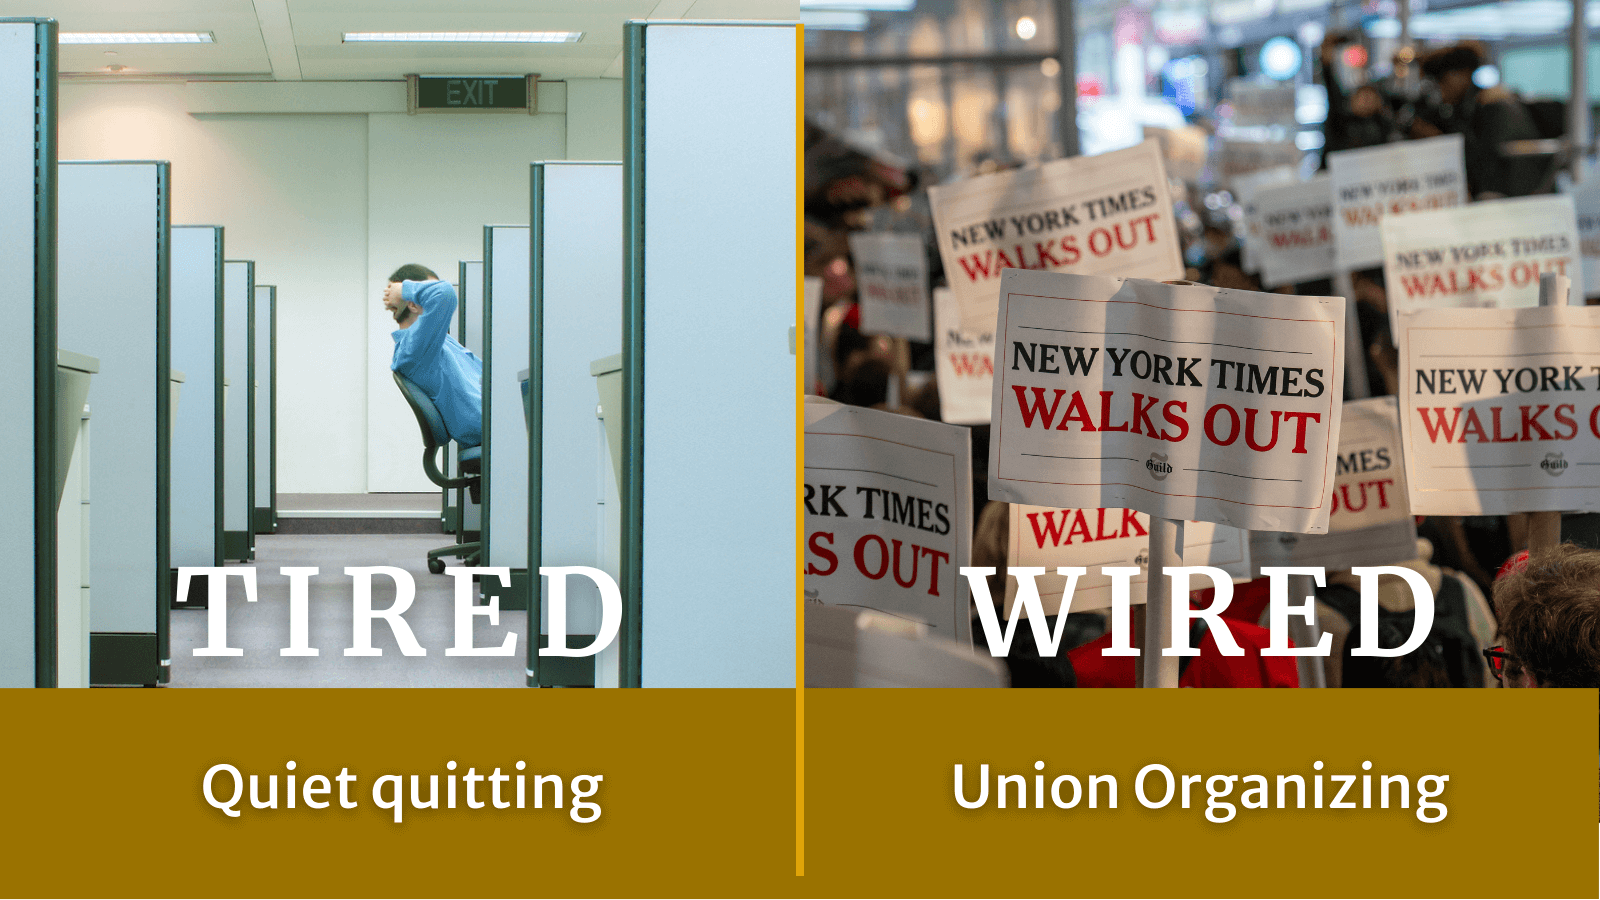 Tired: Quiet quitting. Wired: Union organizing.